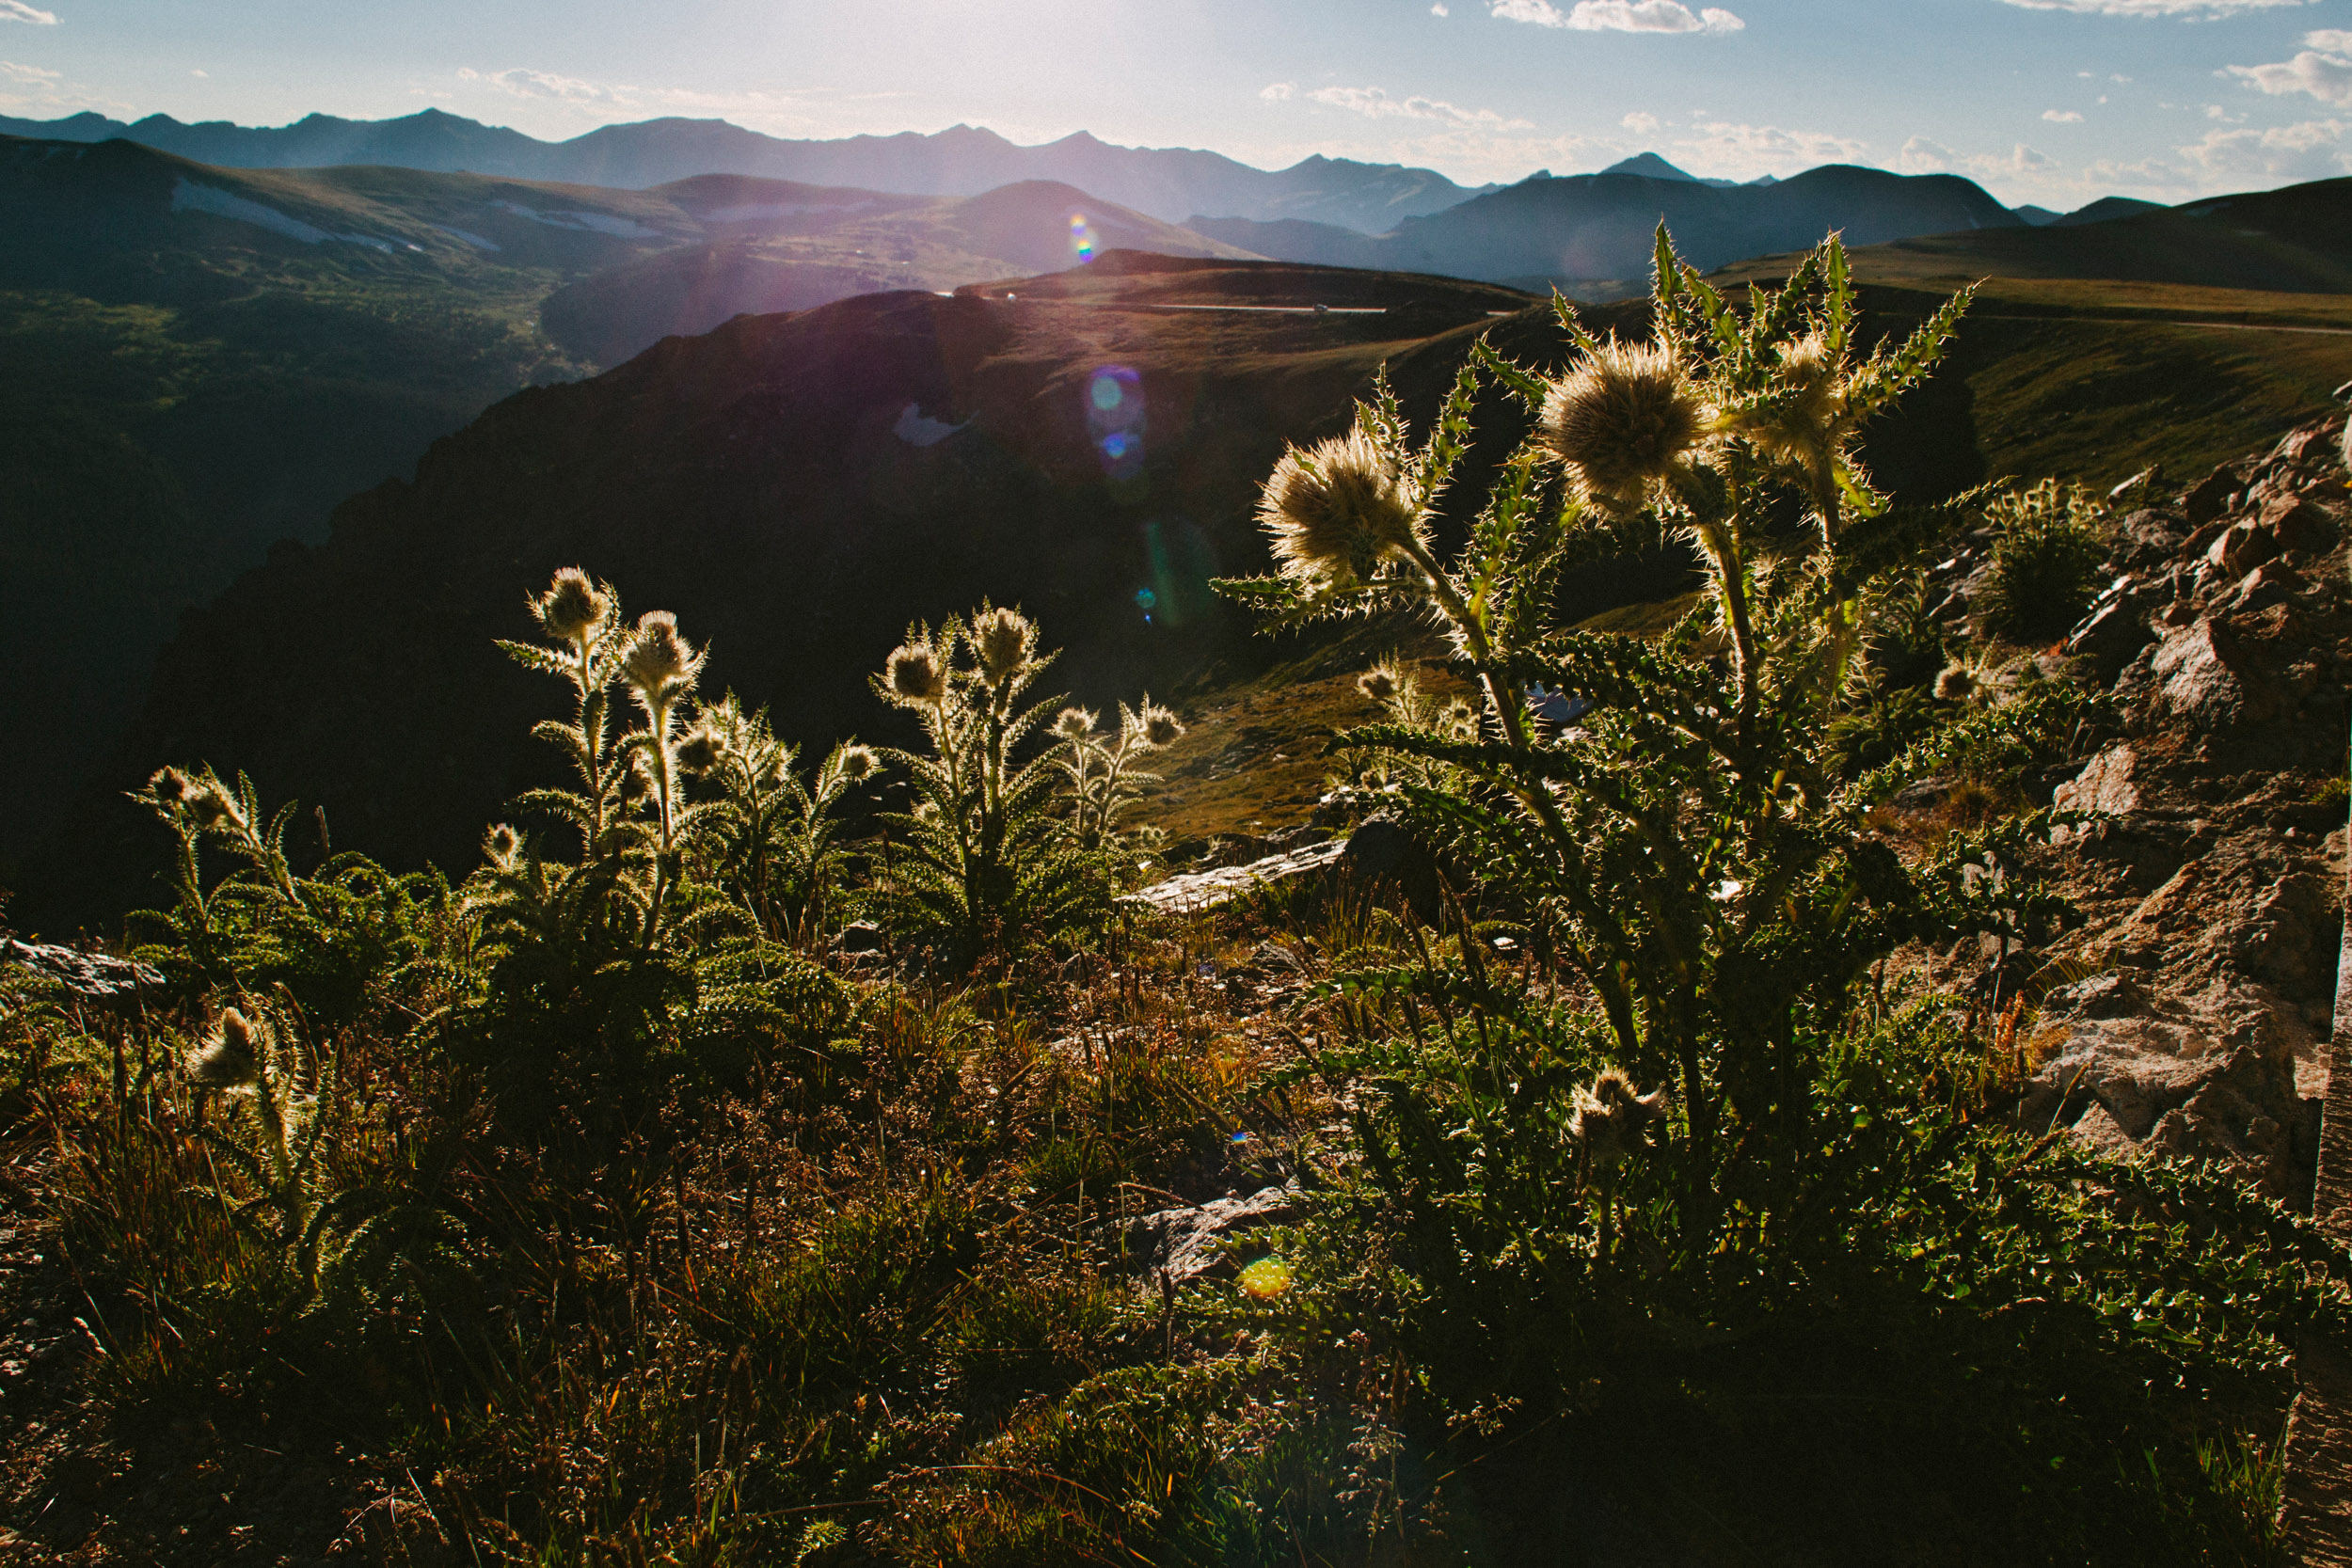 Thistles thrive high above treeline in the rocky mountains